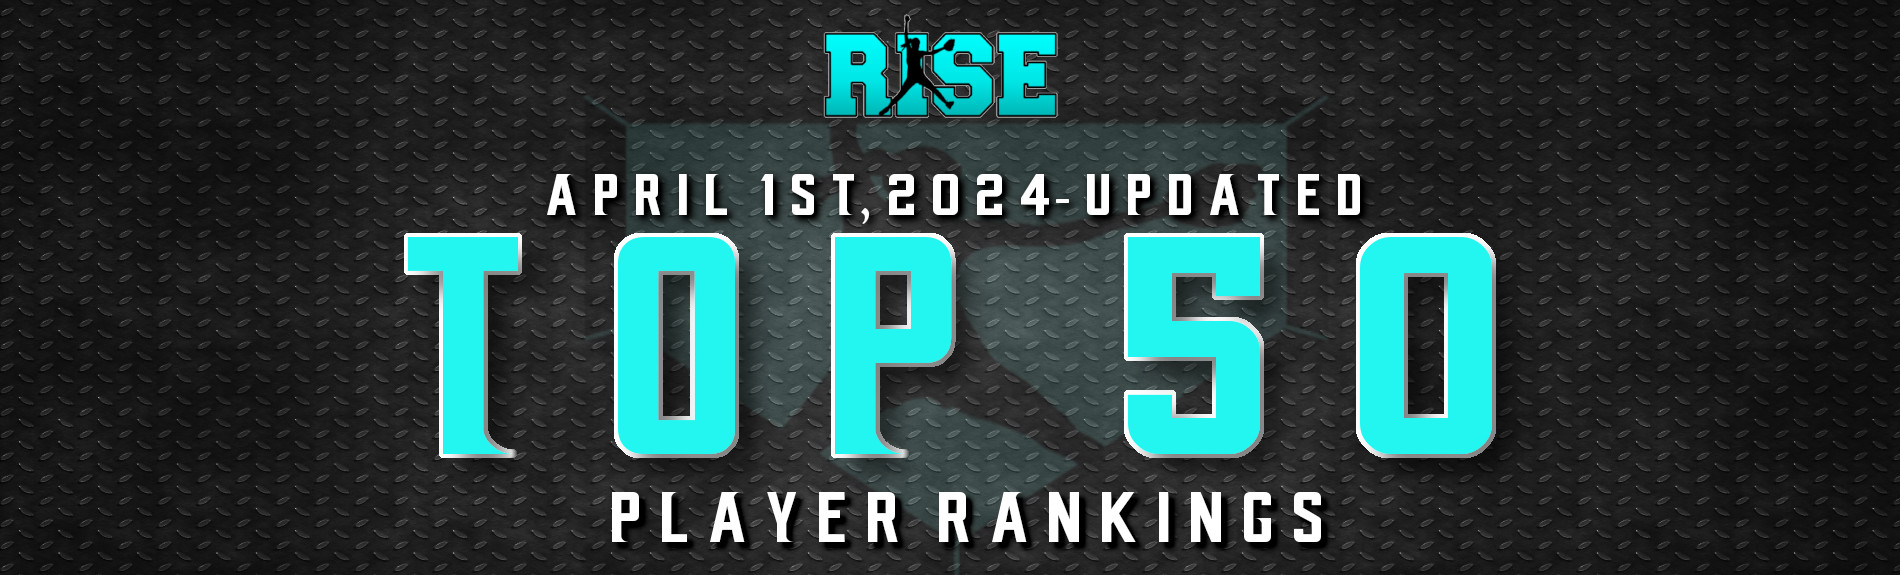 RISE “Top 50” UPDATED Player Rankings-(April 1st, 2024)